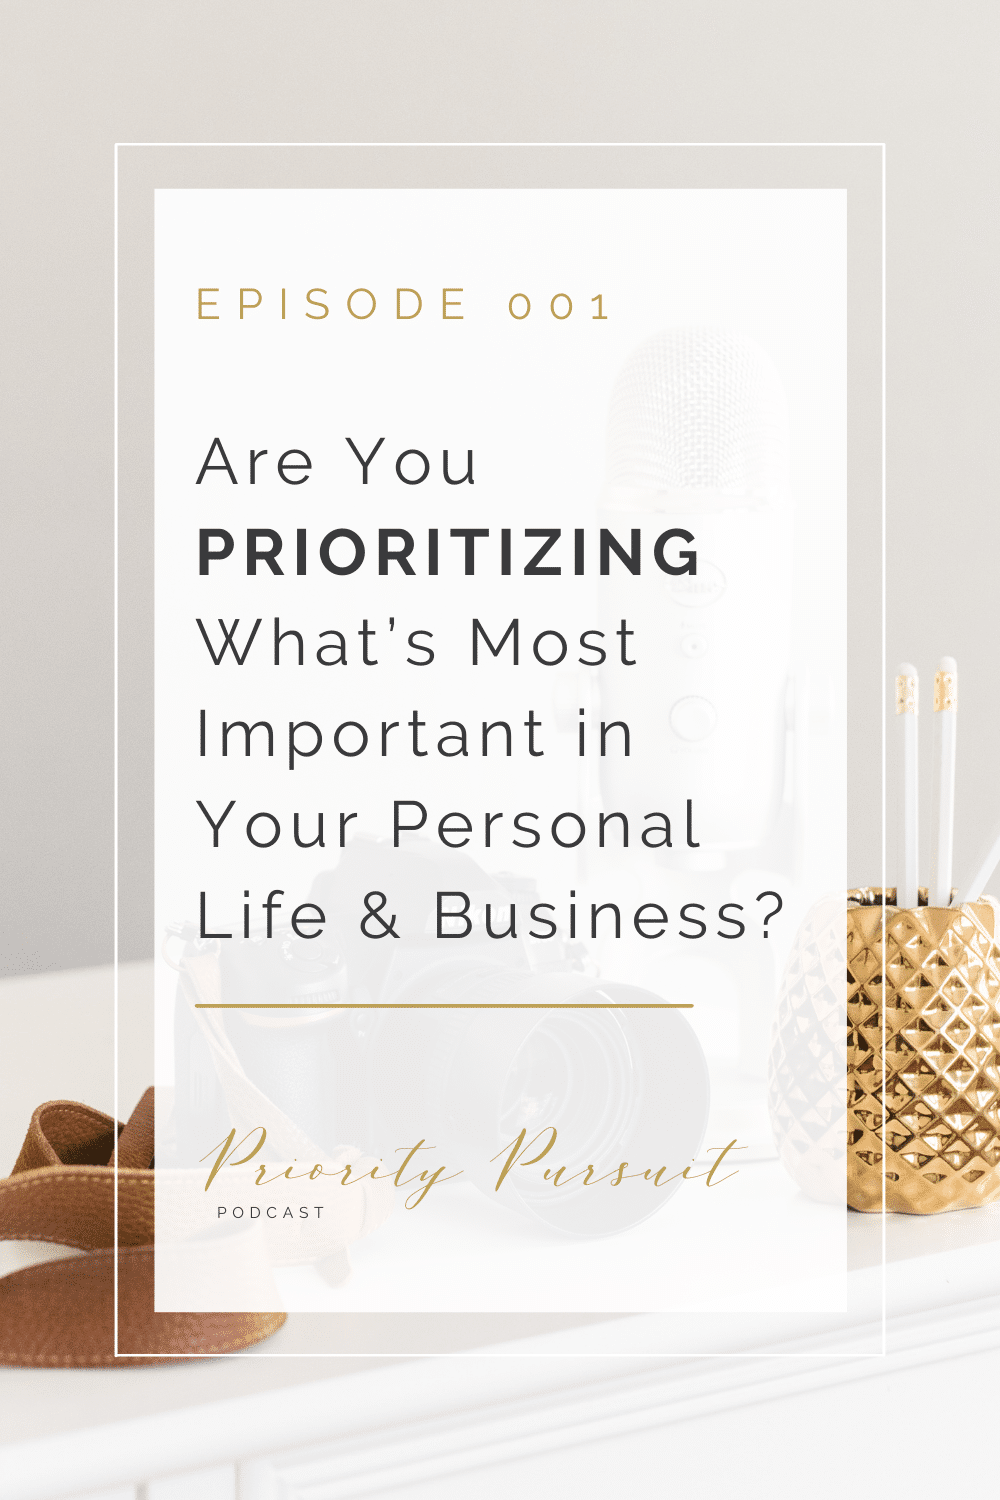 Episode 001 of The Priority Pursuit Podcast helps you assess whether or not you’re prioritizing what’s most important in your personal life and business